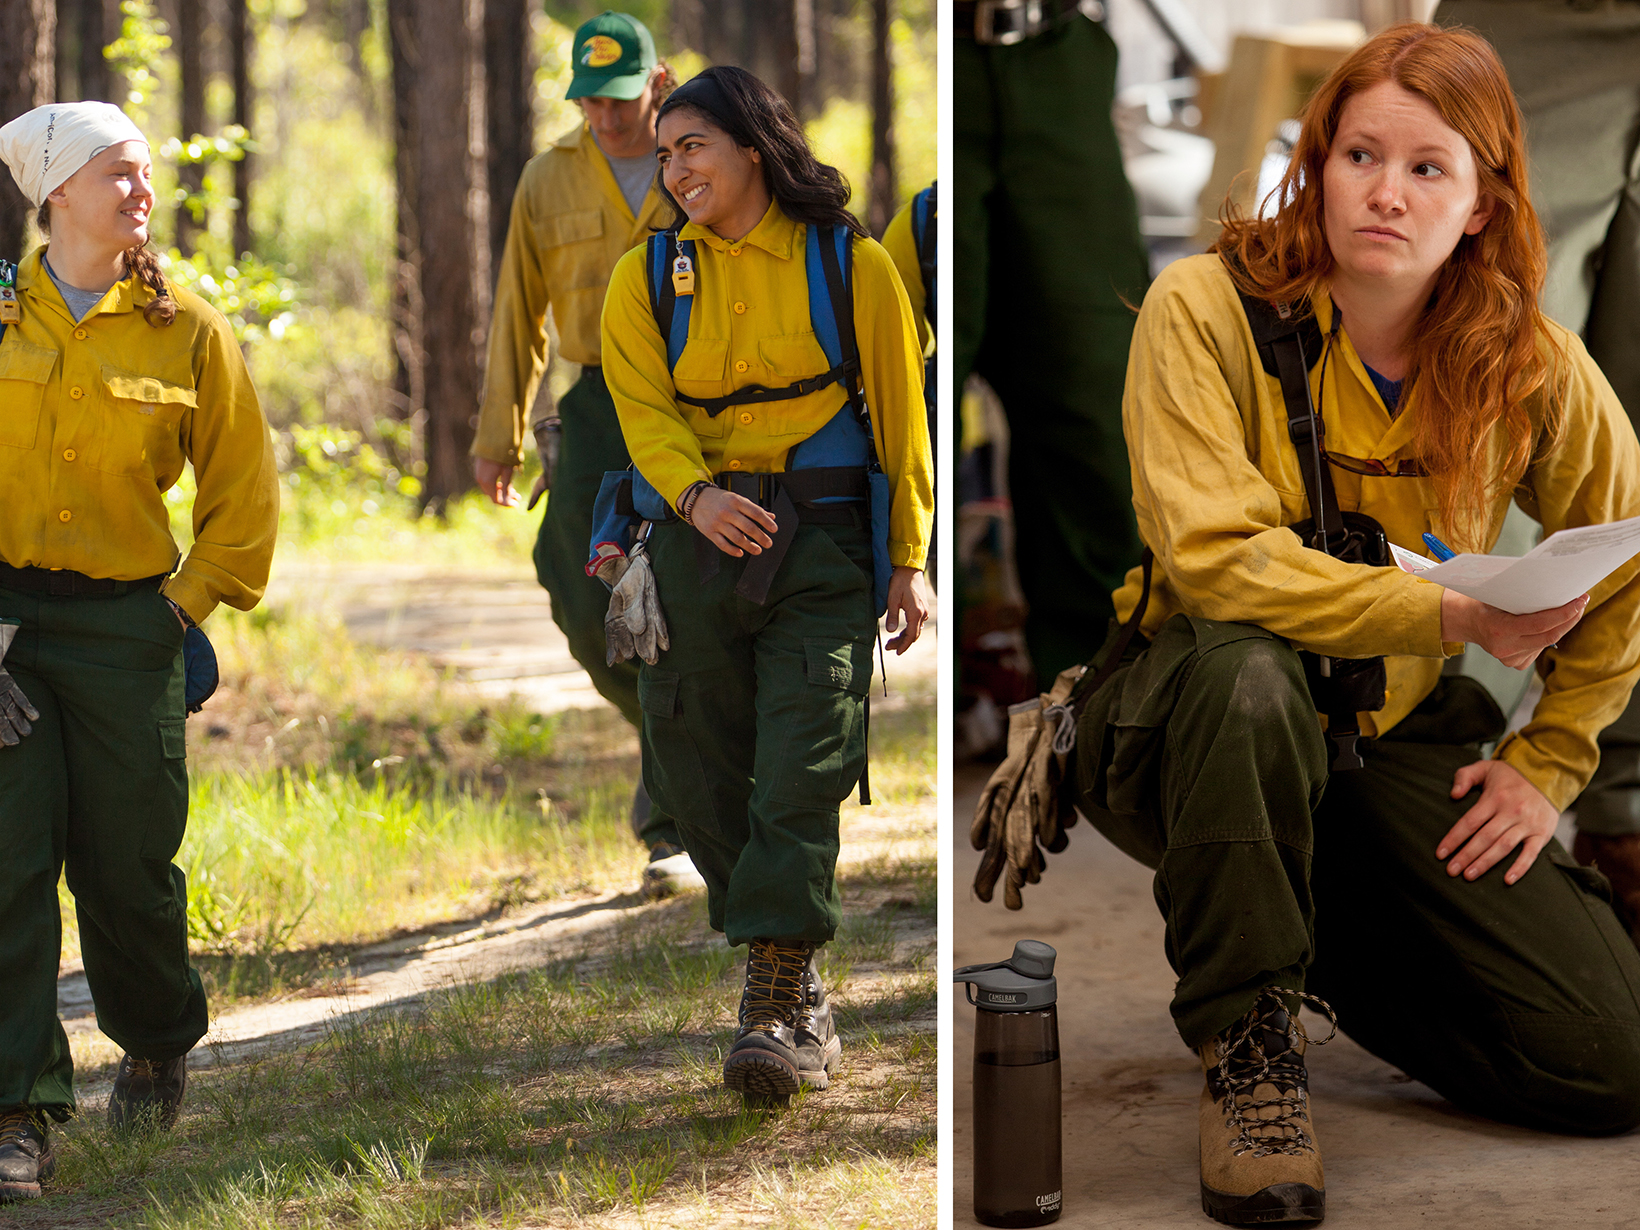 Two photos combined to create a single image showing women participating in a controlled burn, walking together through a forest and listening during a morning briefing.